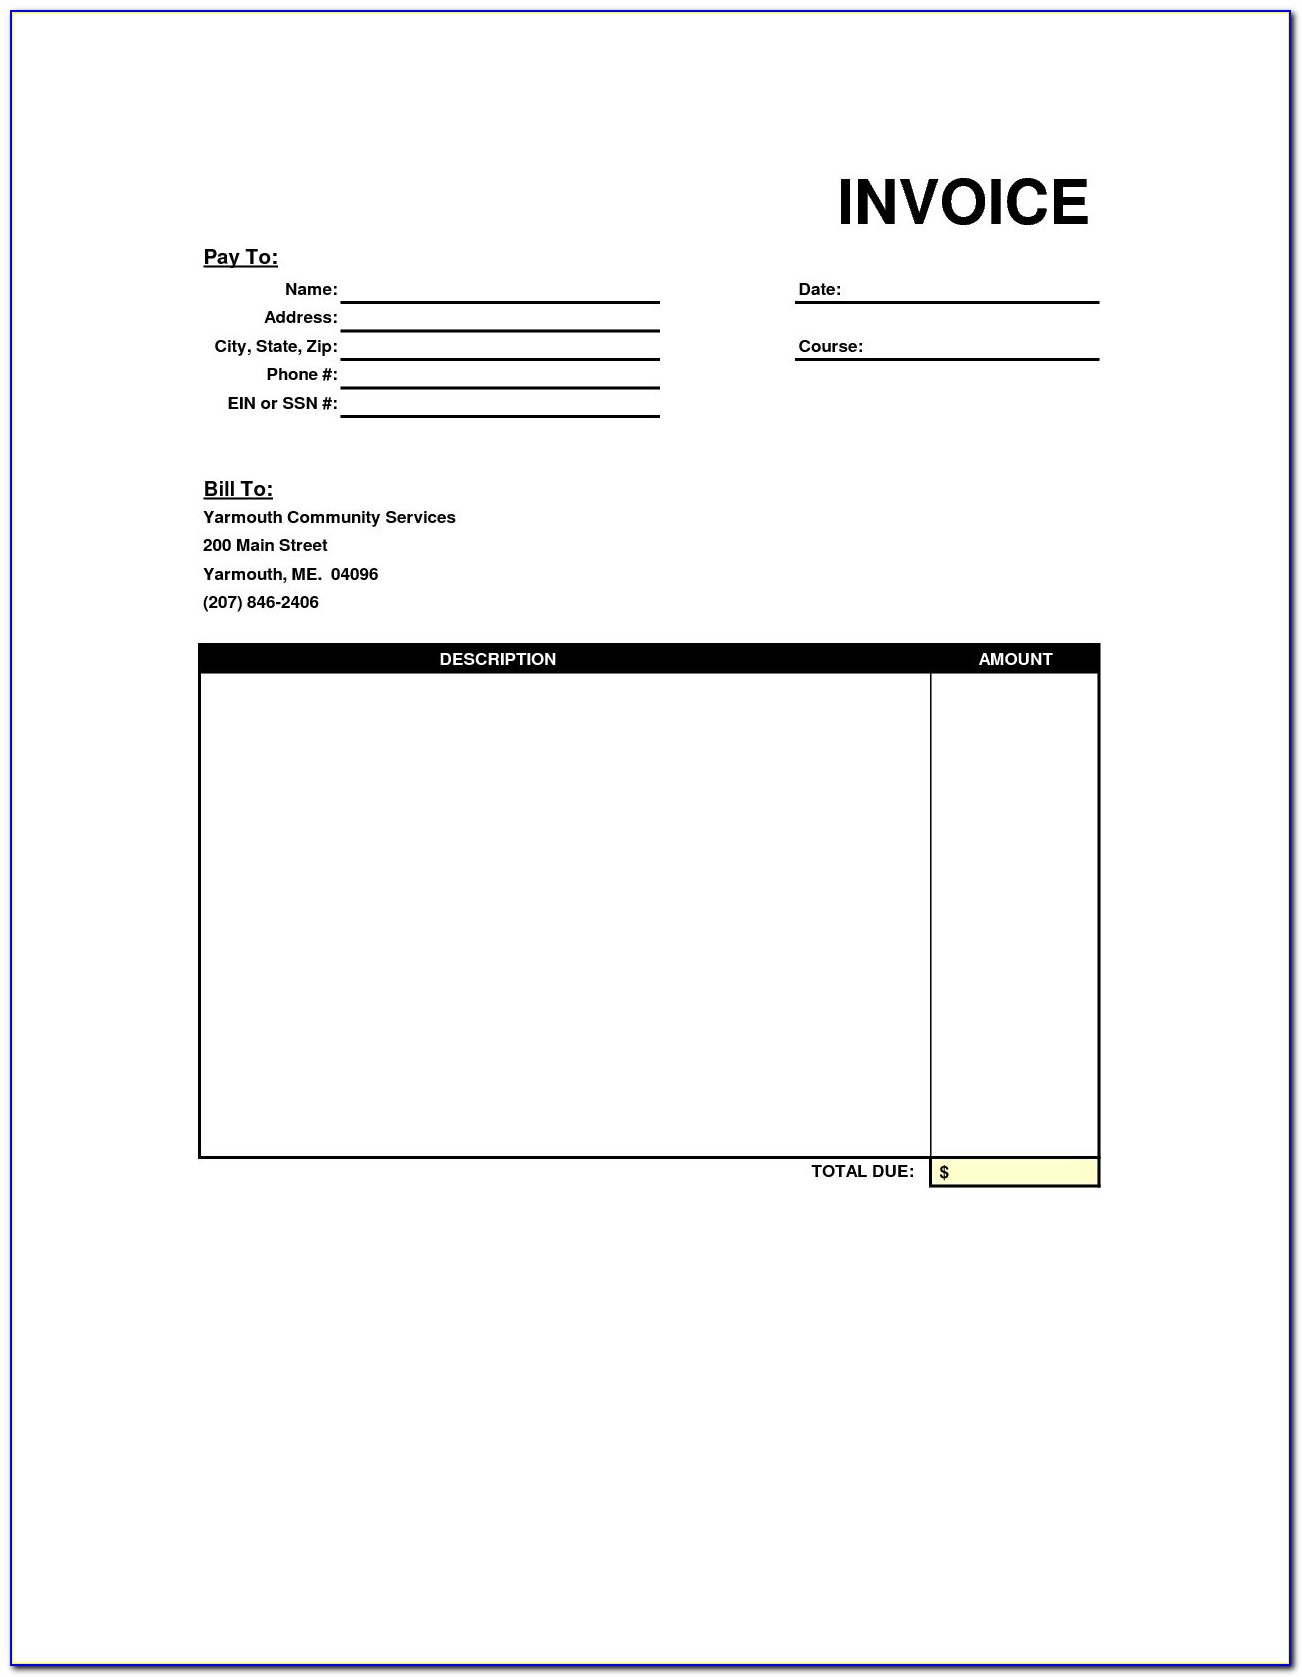 Mobile Bill Invoice Format In Word